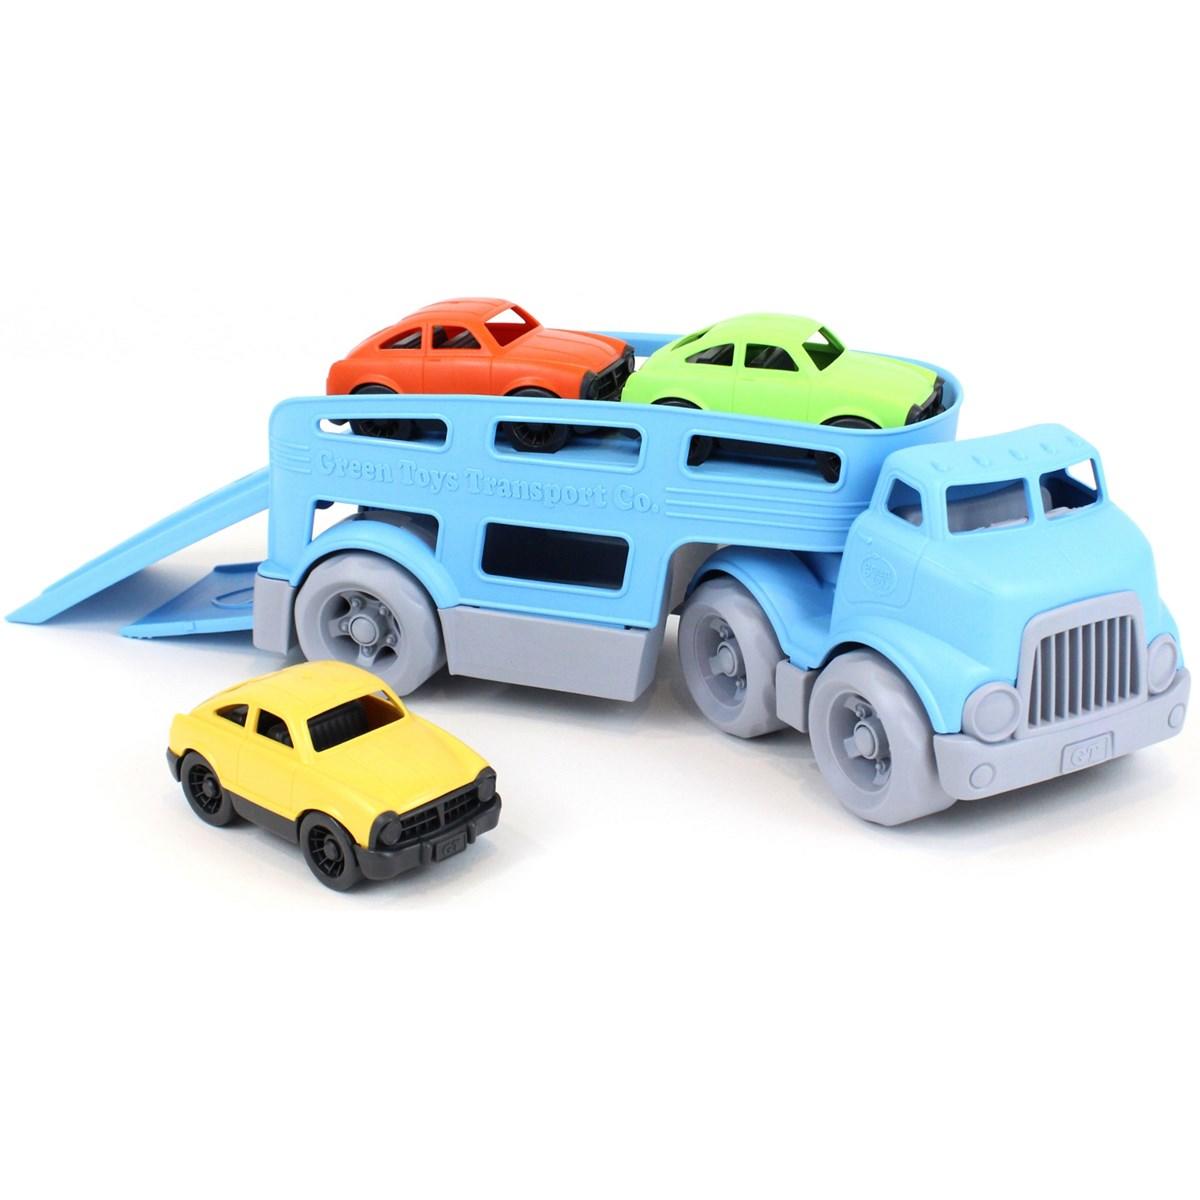 Blue car Transporter with 3 cars all made from recycled milk cartons